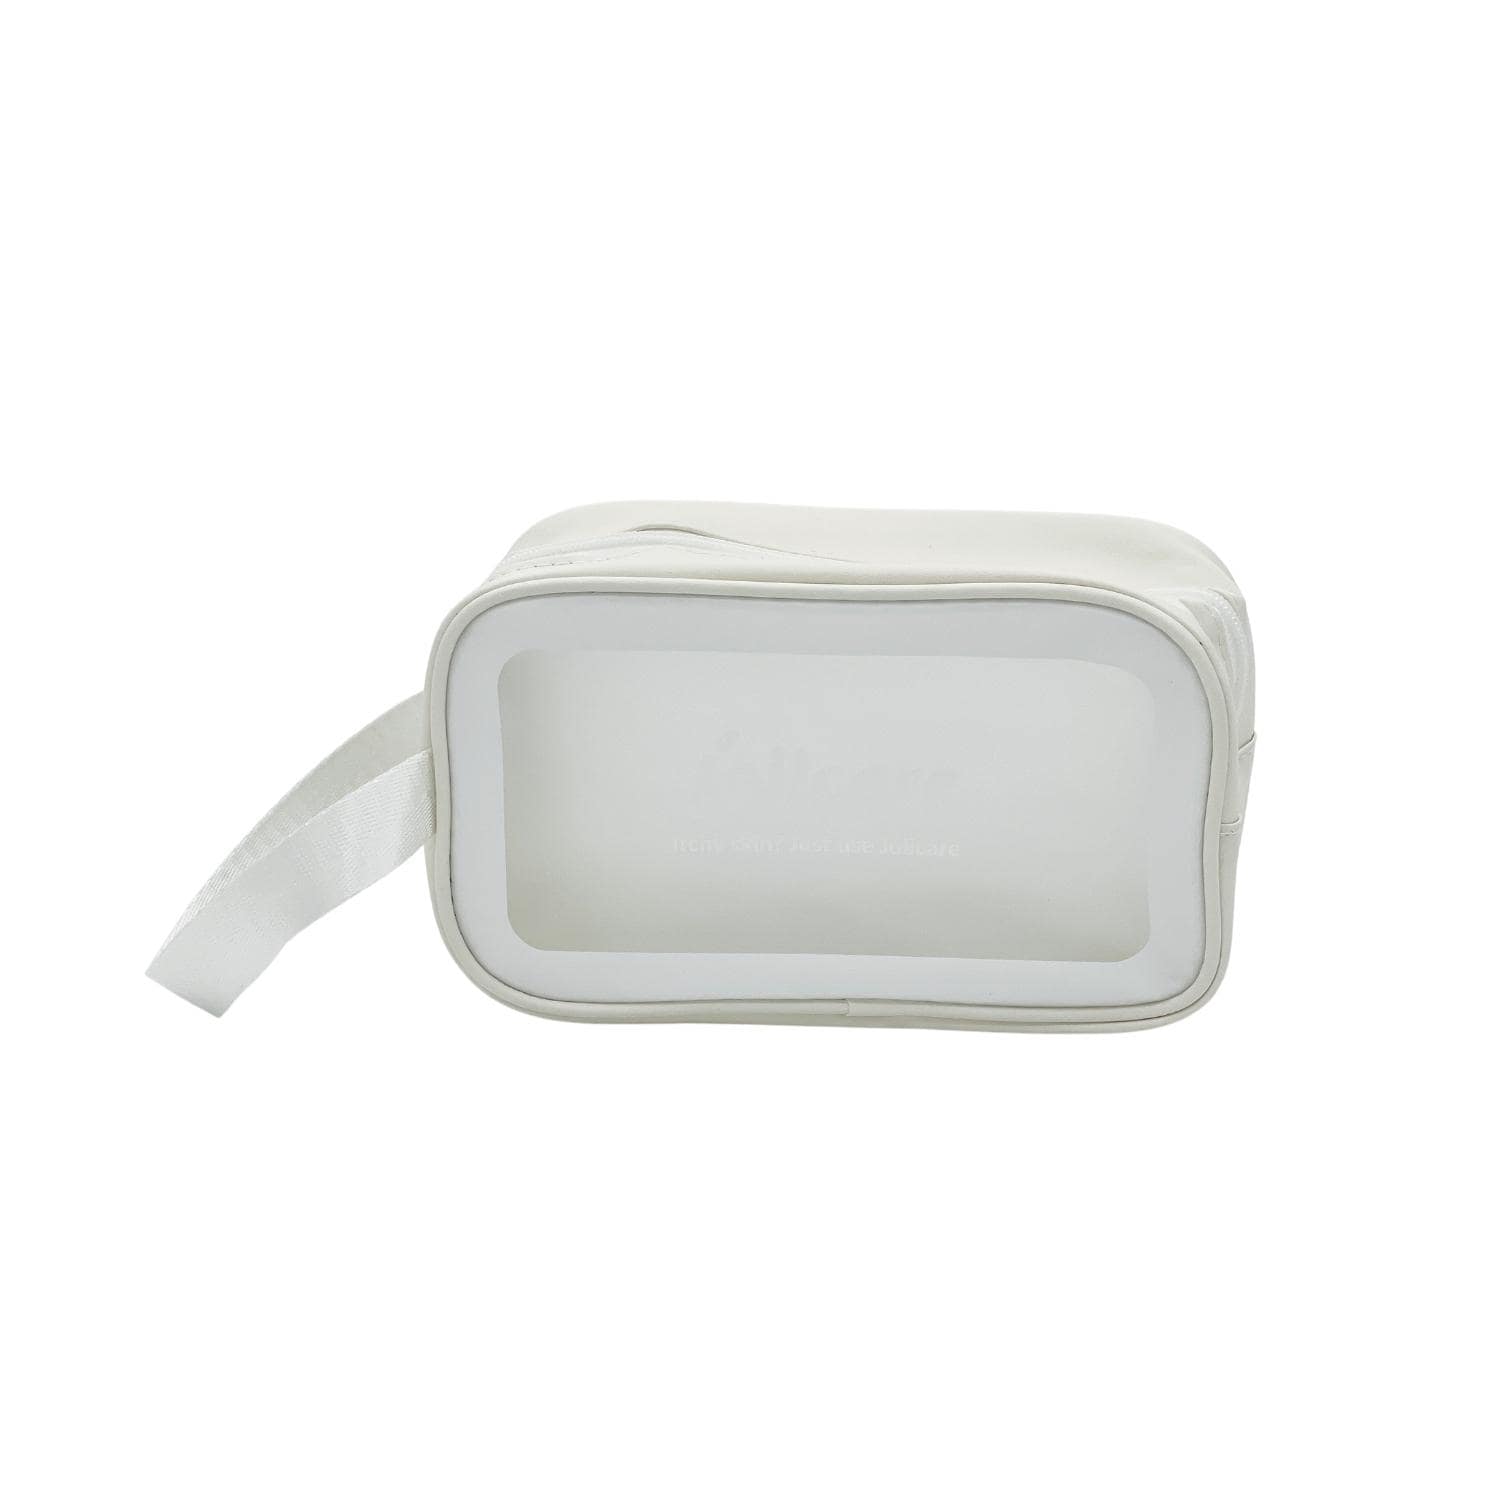 Jolicare Travel Pouch (Limited Edition)